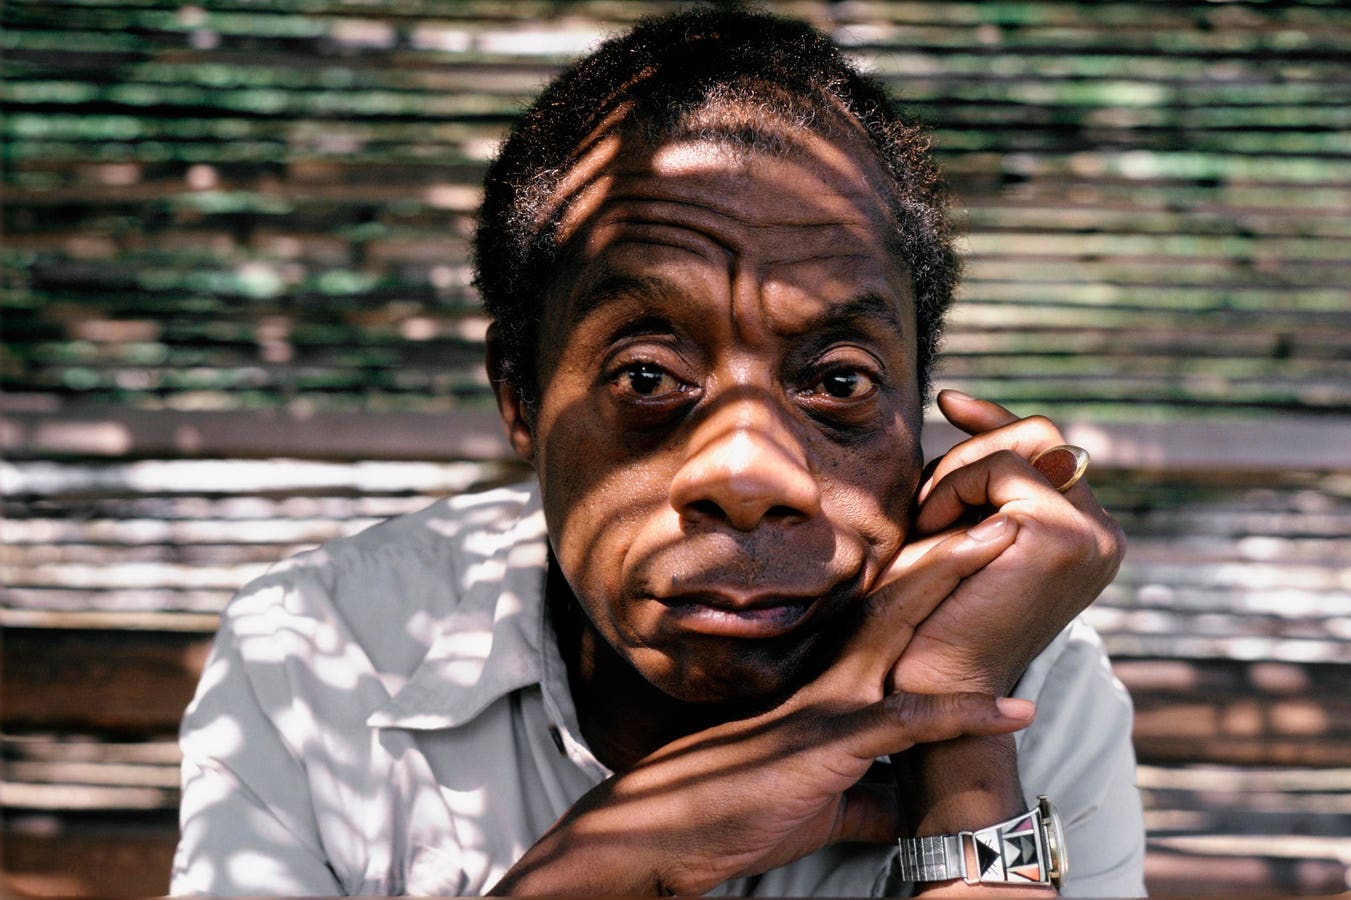 100th Anniversary Of James Baldwin’s Birth Honored At National Portrait Gallery